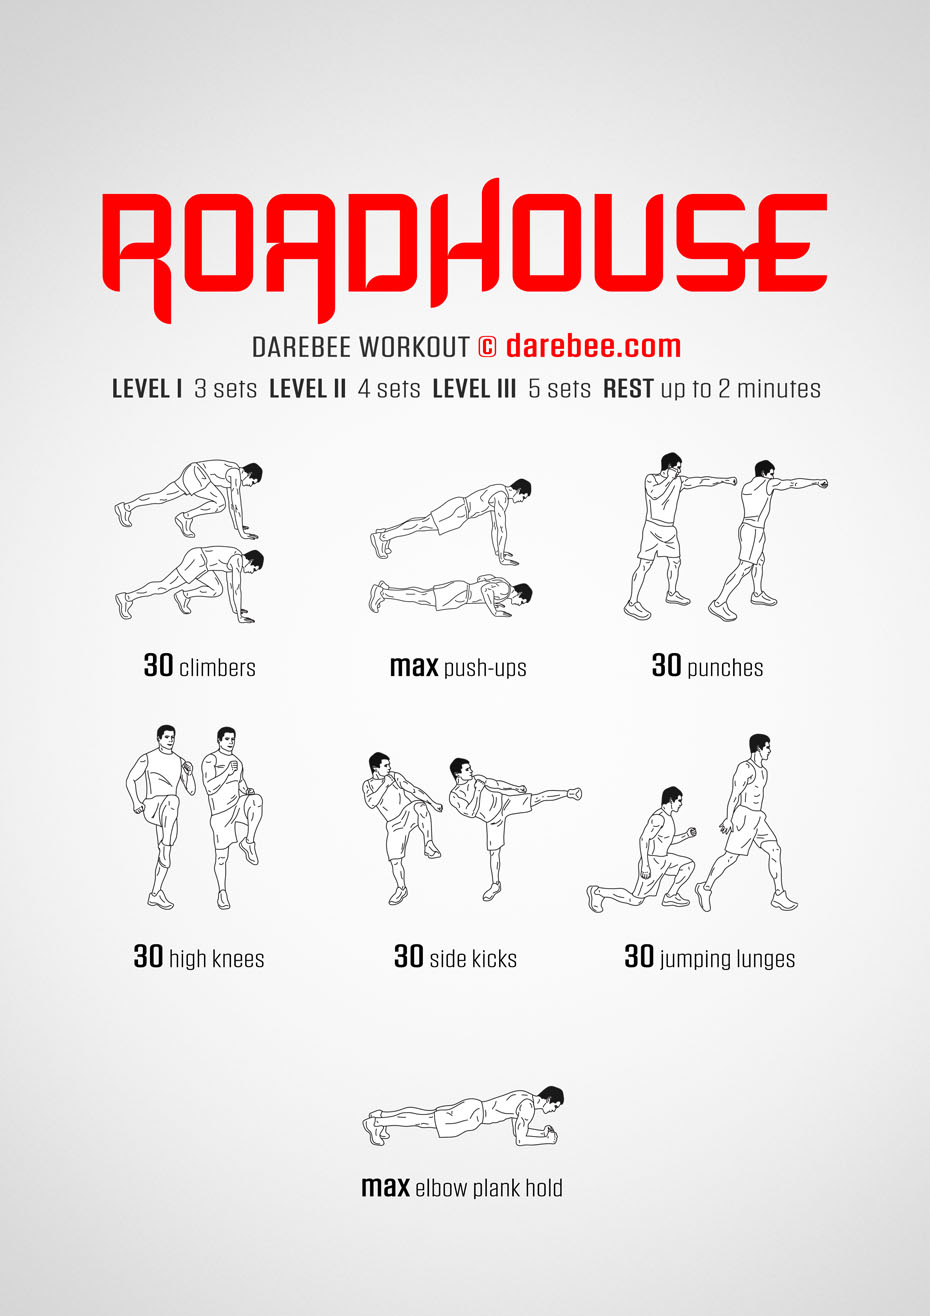 Roadhouse is a DAREBEE home fitness no-equipment combat moves based total body strength and conditioning workout.